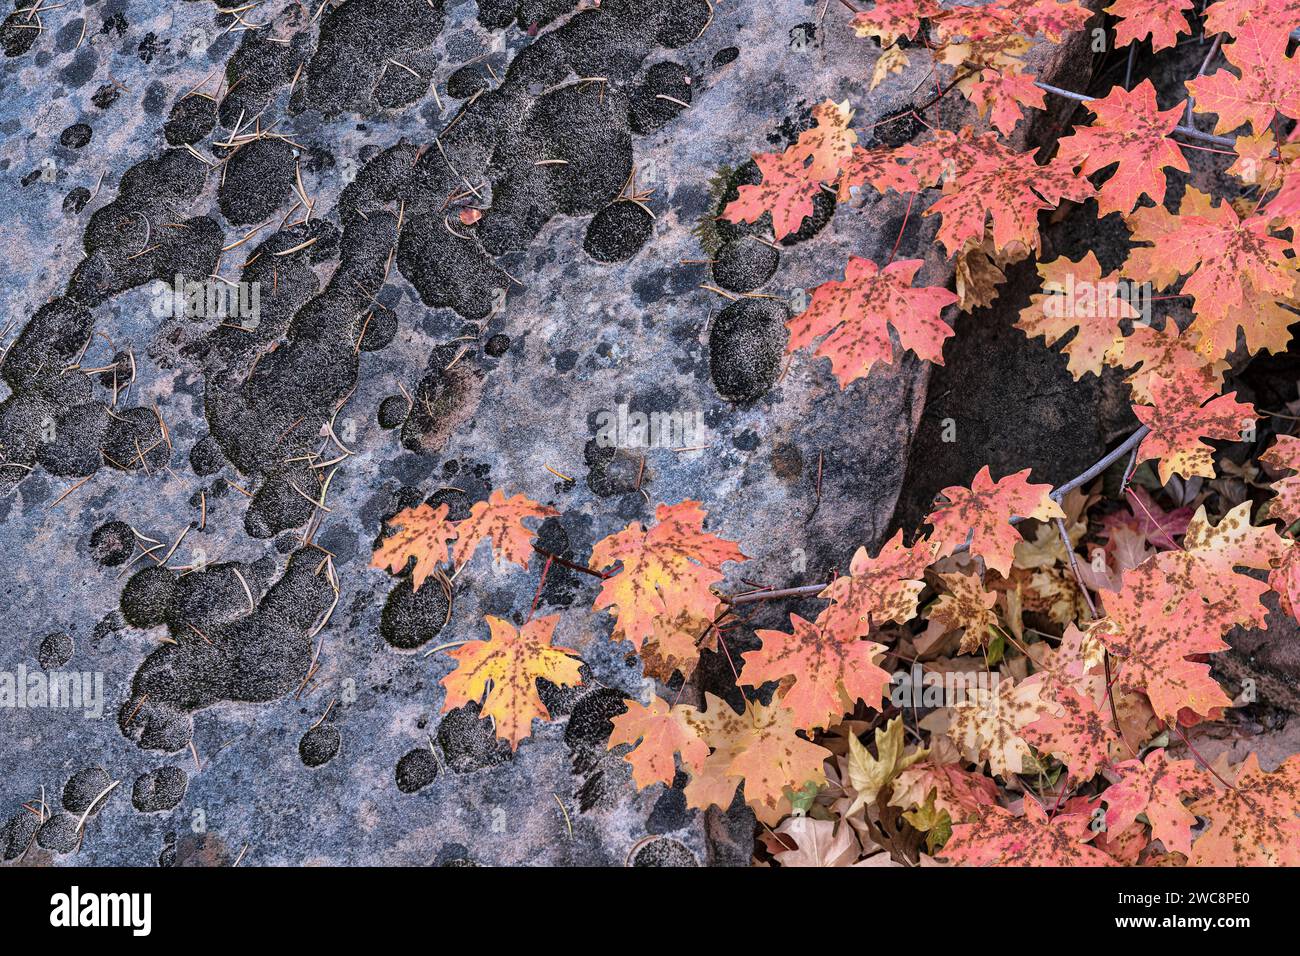 Colorful bigtooth maple leaves in the Clear Creek section of Zion National Park in Utah Stock Photo